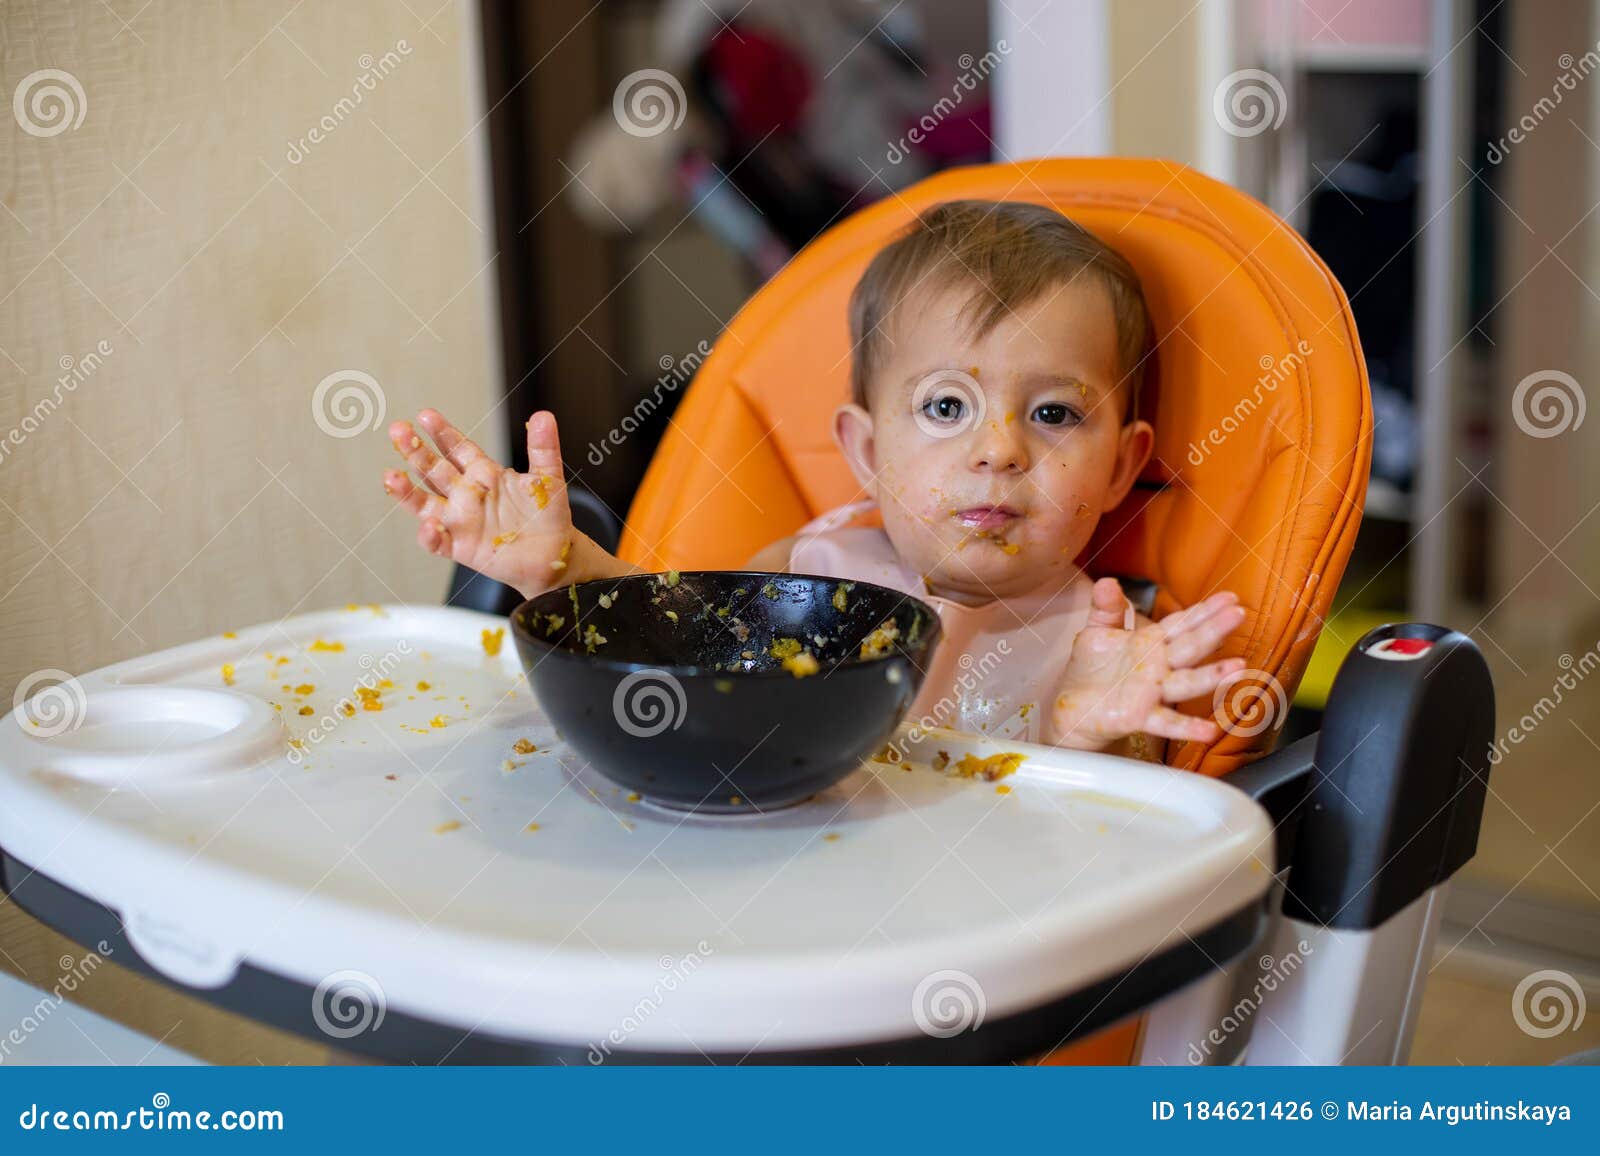 Cute One Year Old Baby Girl In An Orange Child Seat In ...